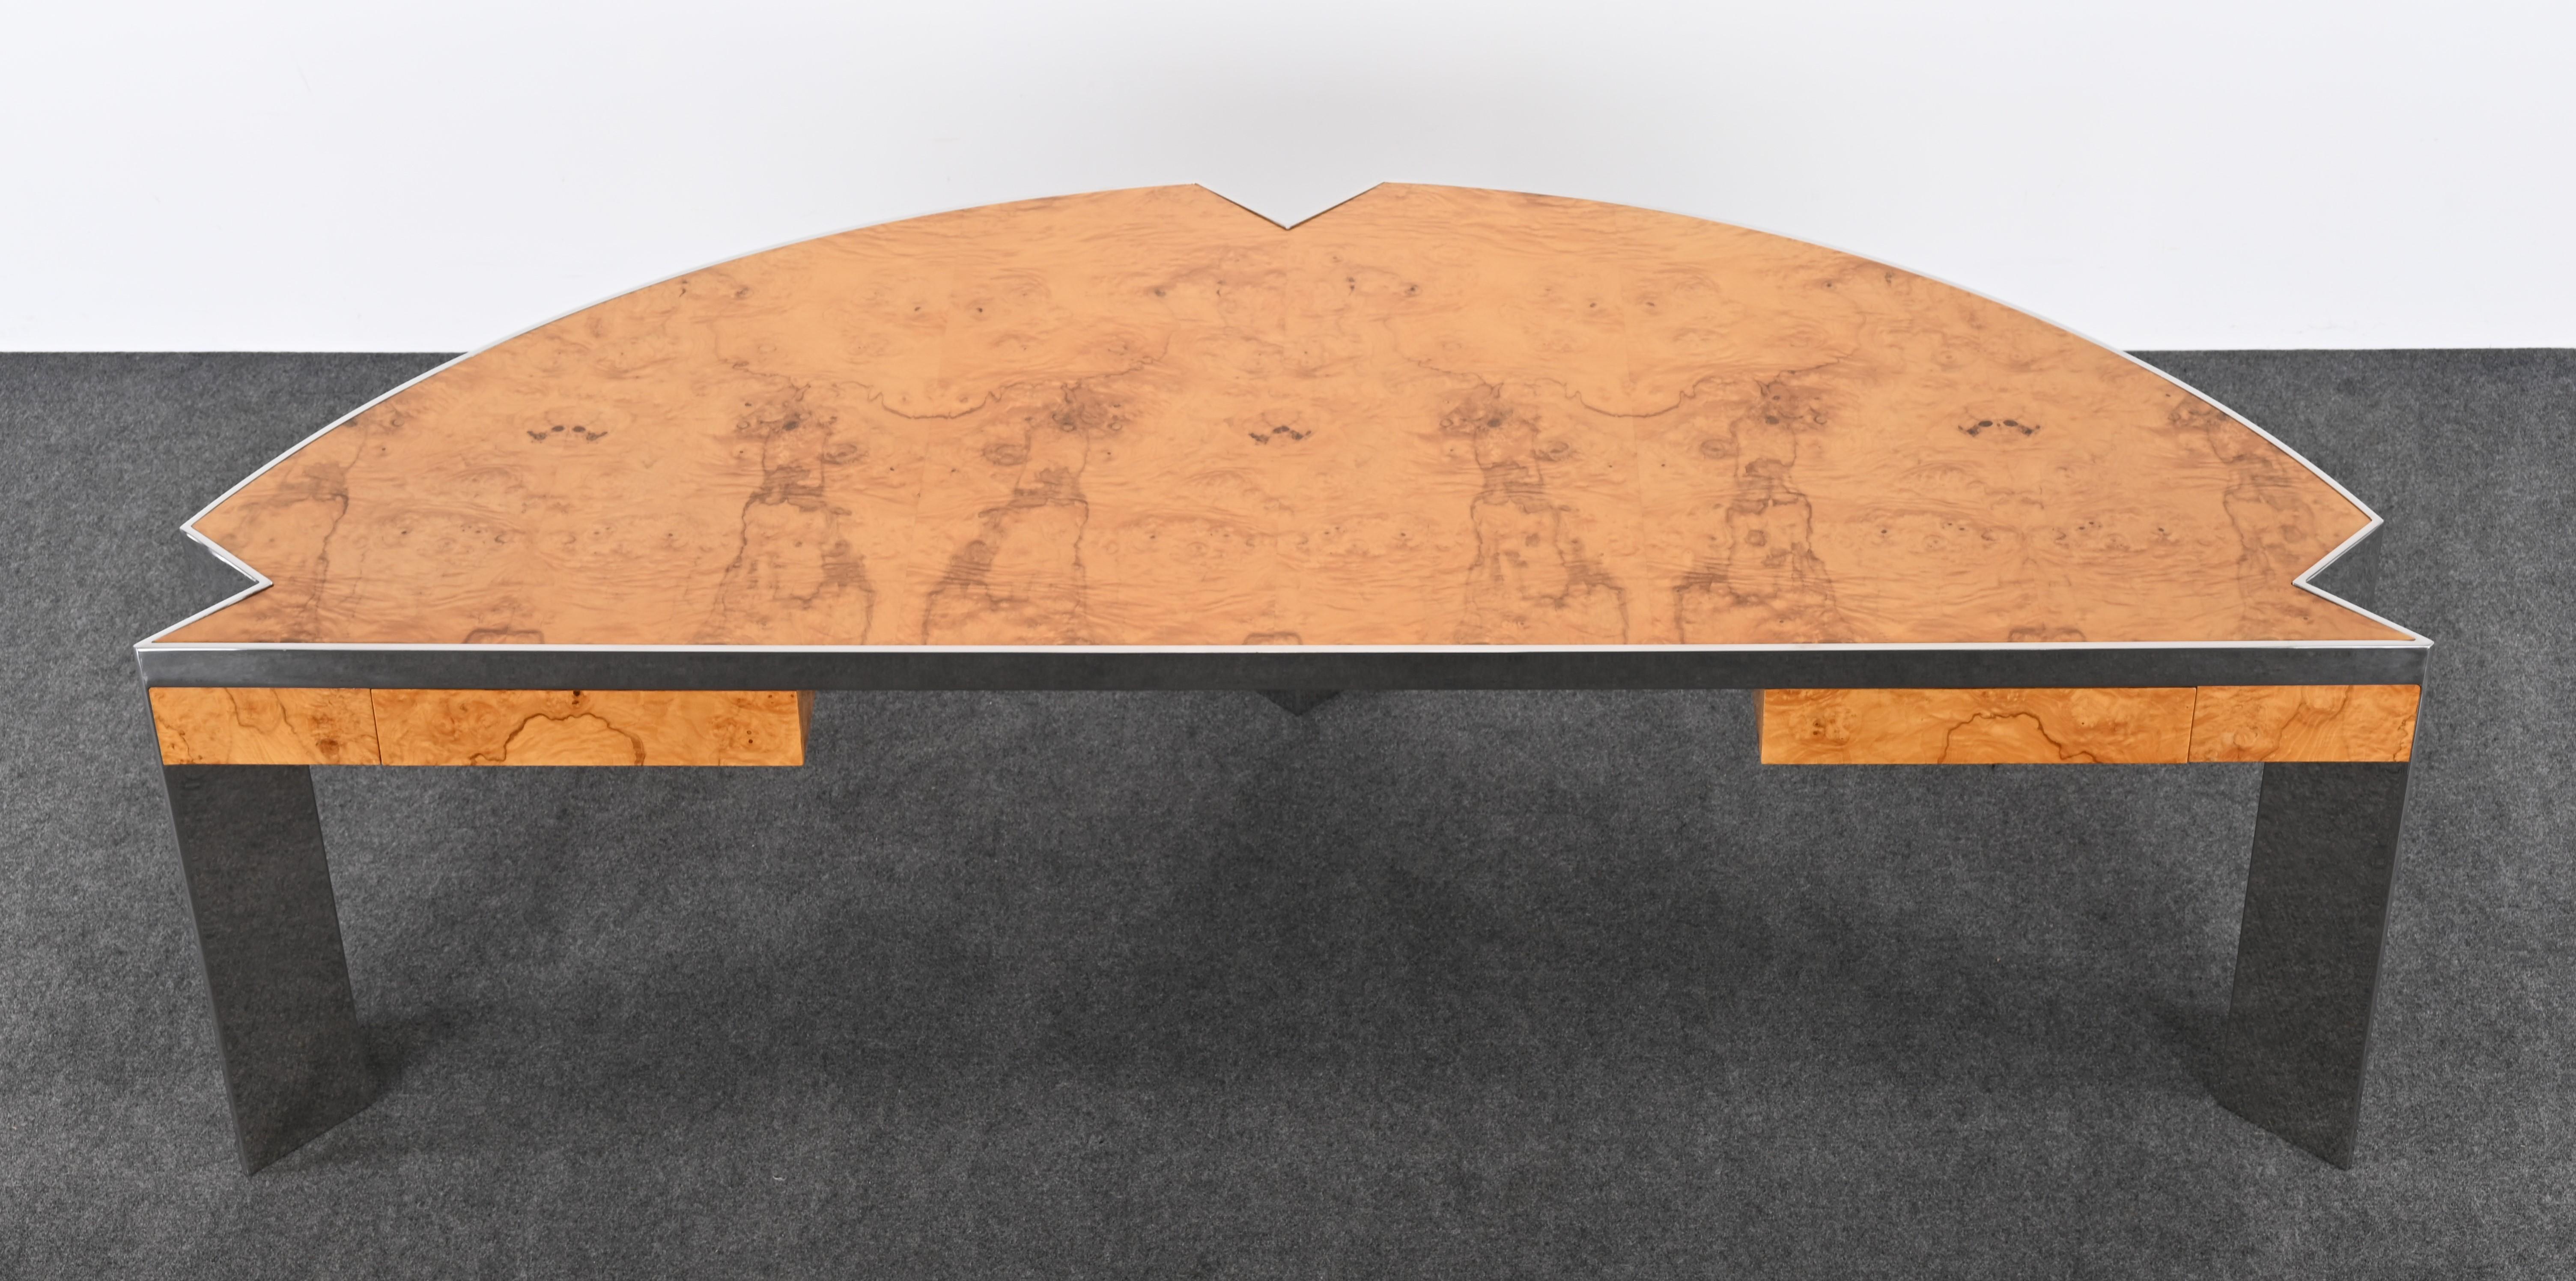 Mid-Century Modern Stainless Steel and Burl Wood Desk by Leon Rosen for Pace, 1980s For Sale